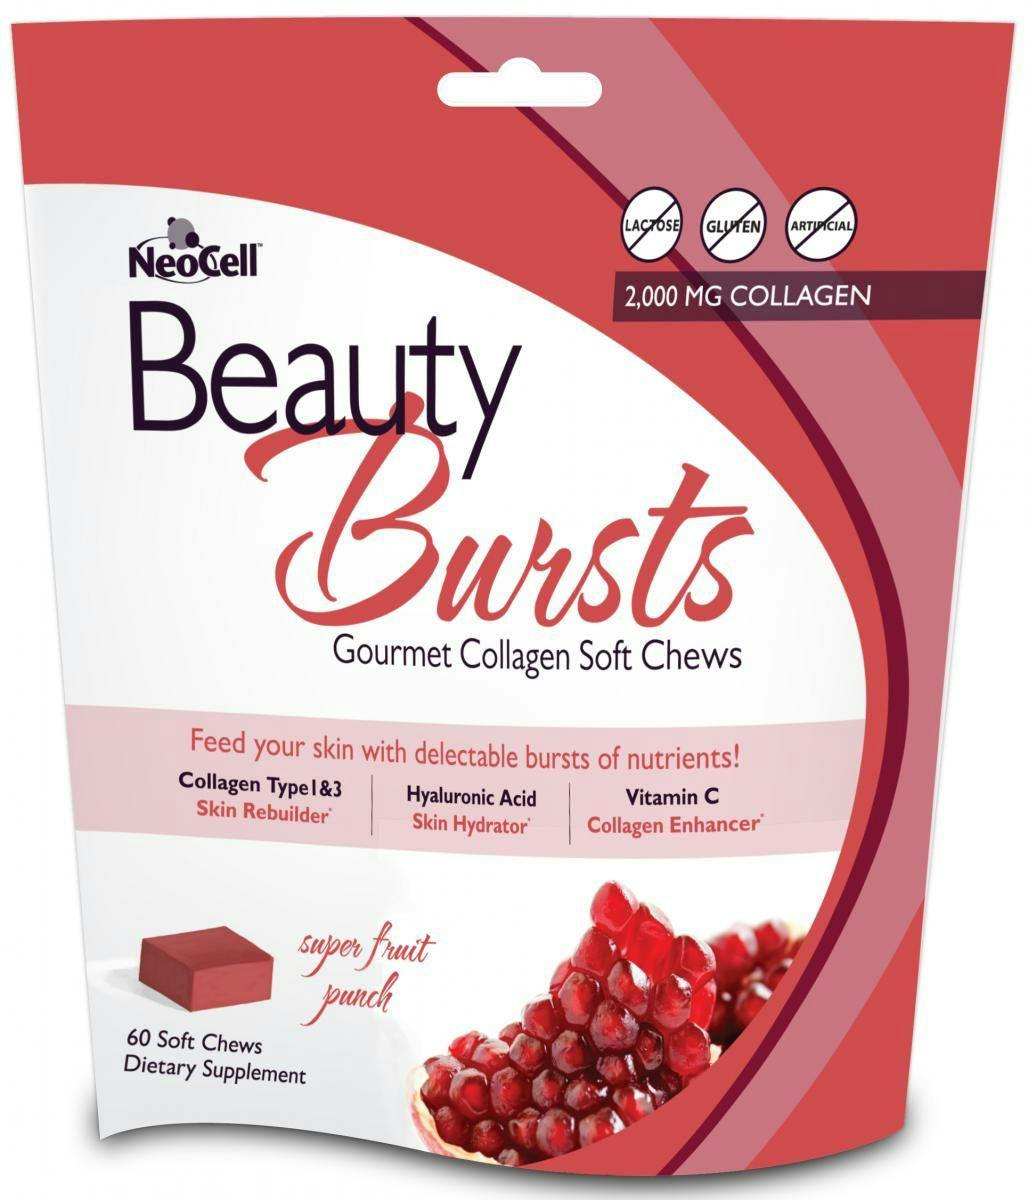 Natural Products Expo East Review: NeoCell’s New Beauty Bursts